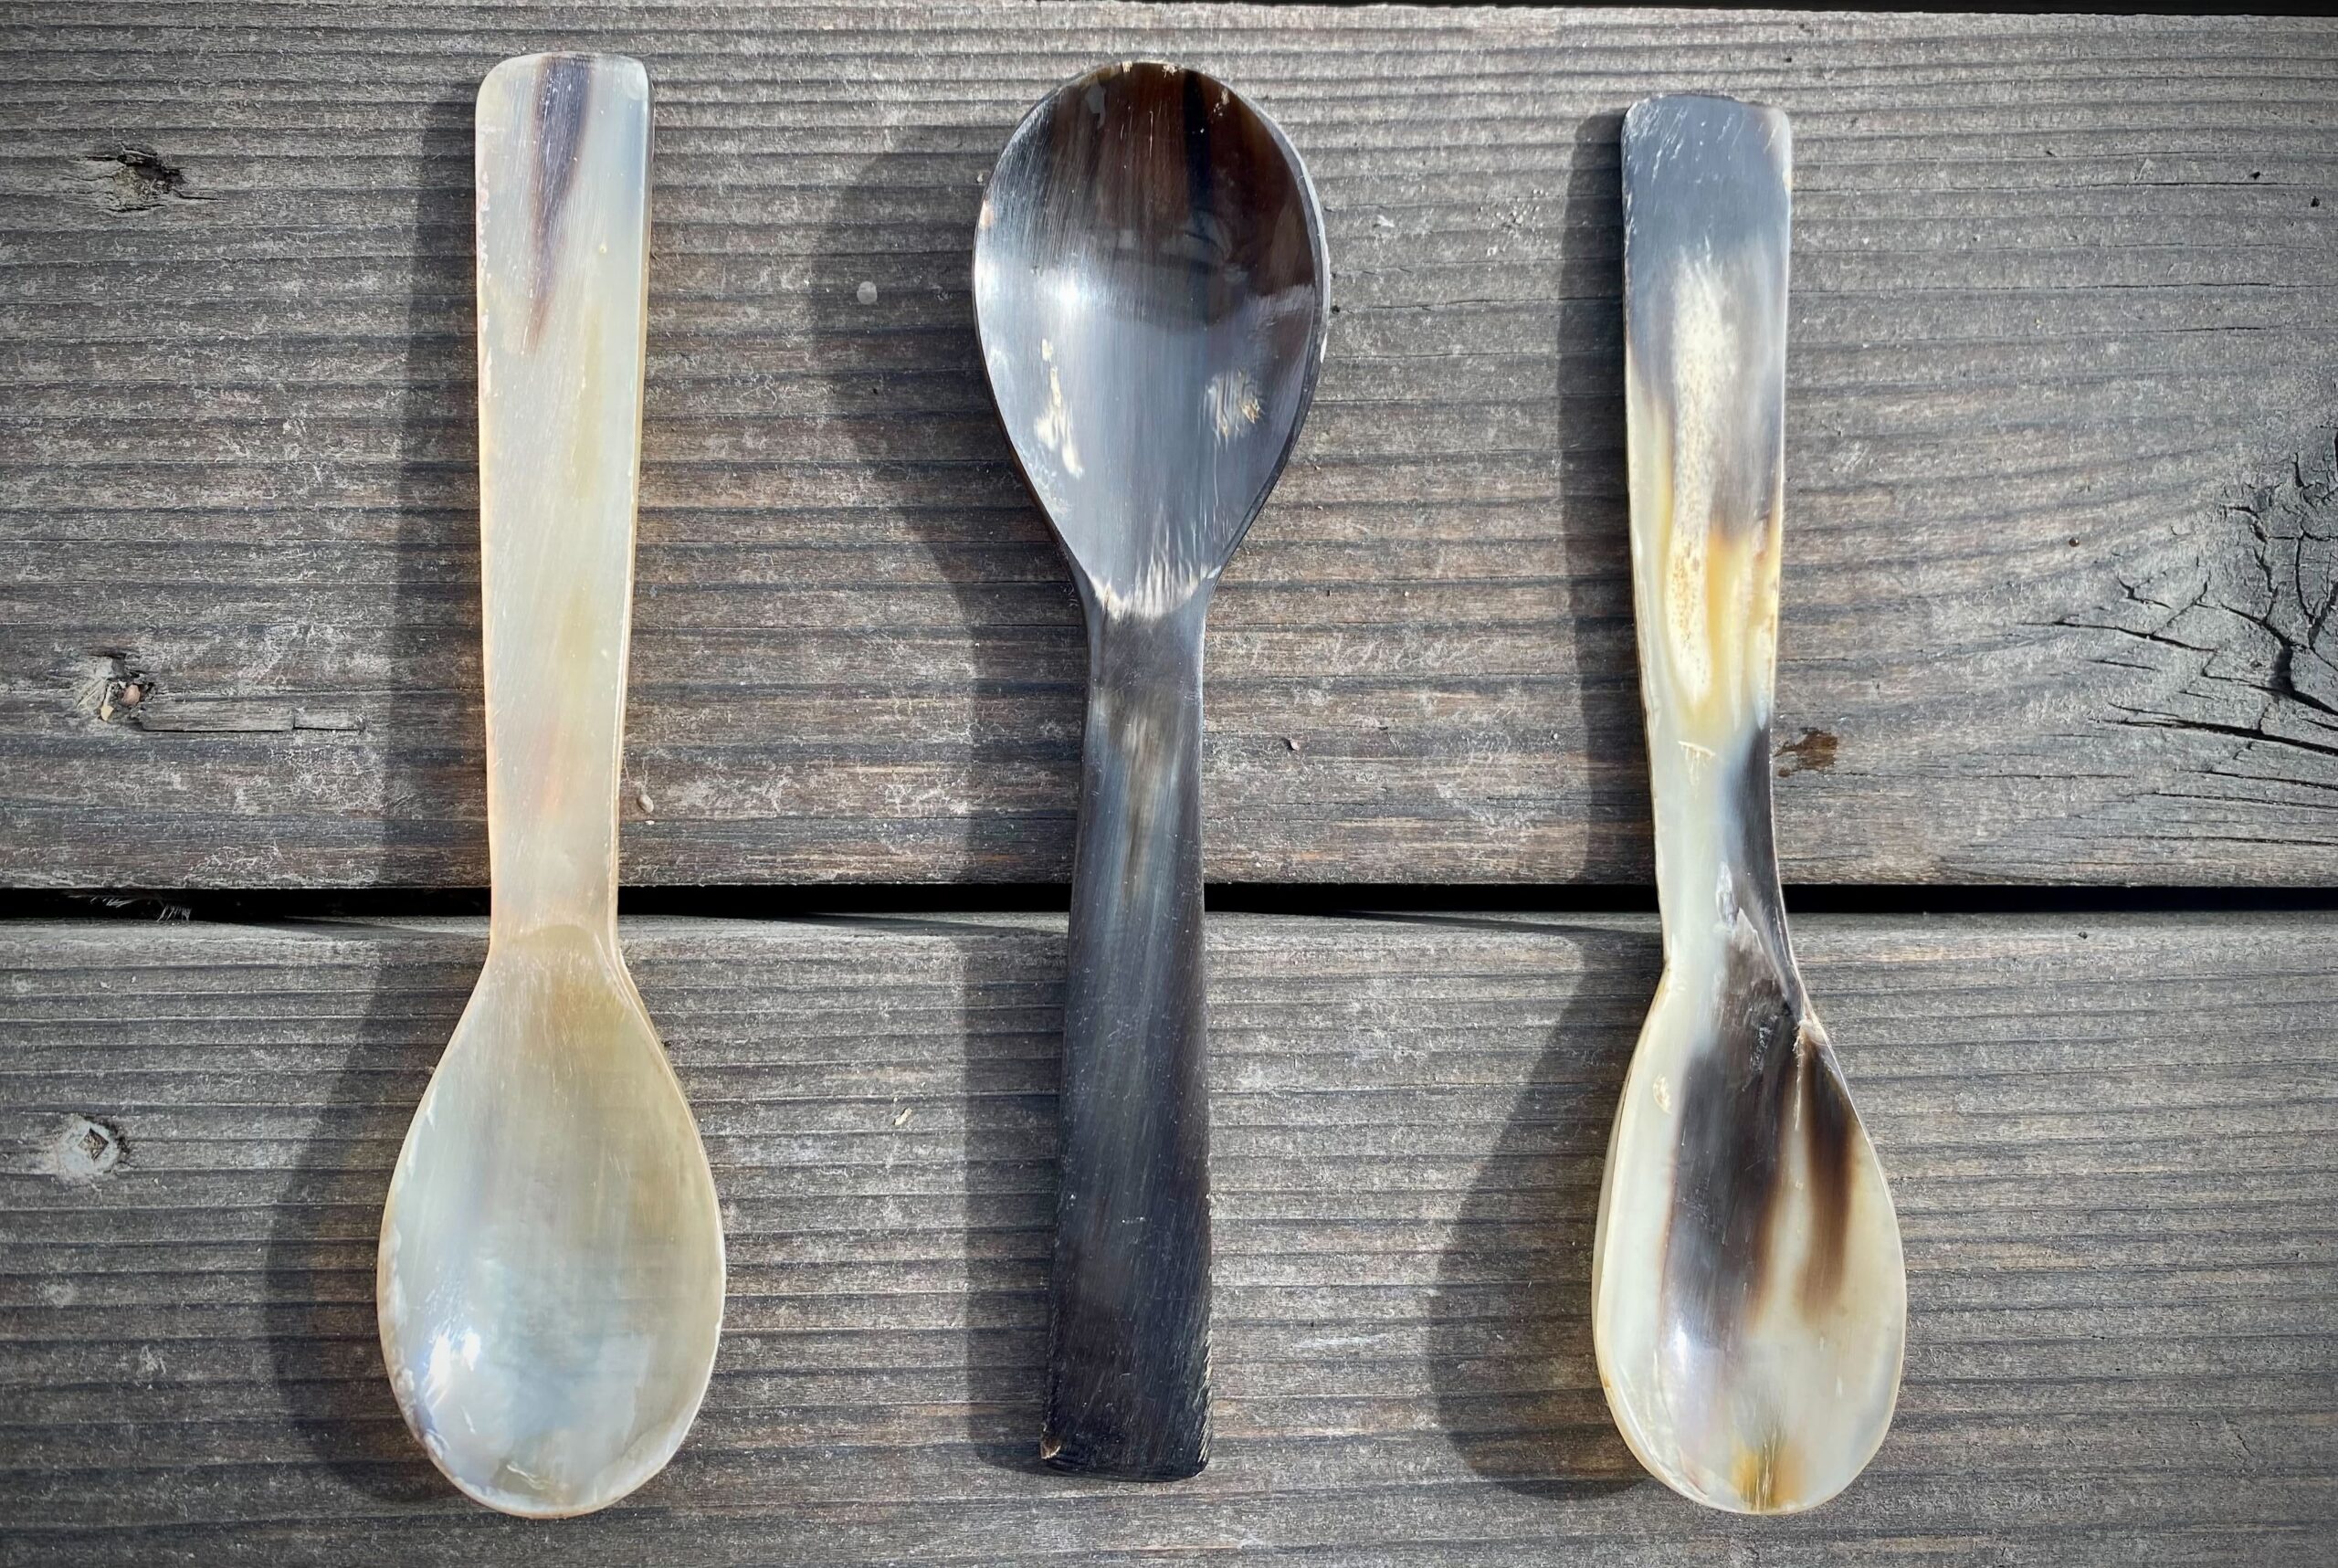 Jackson Hole History Museum Store horn spoons.